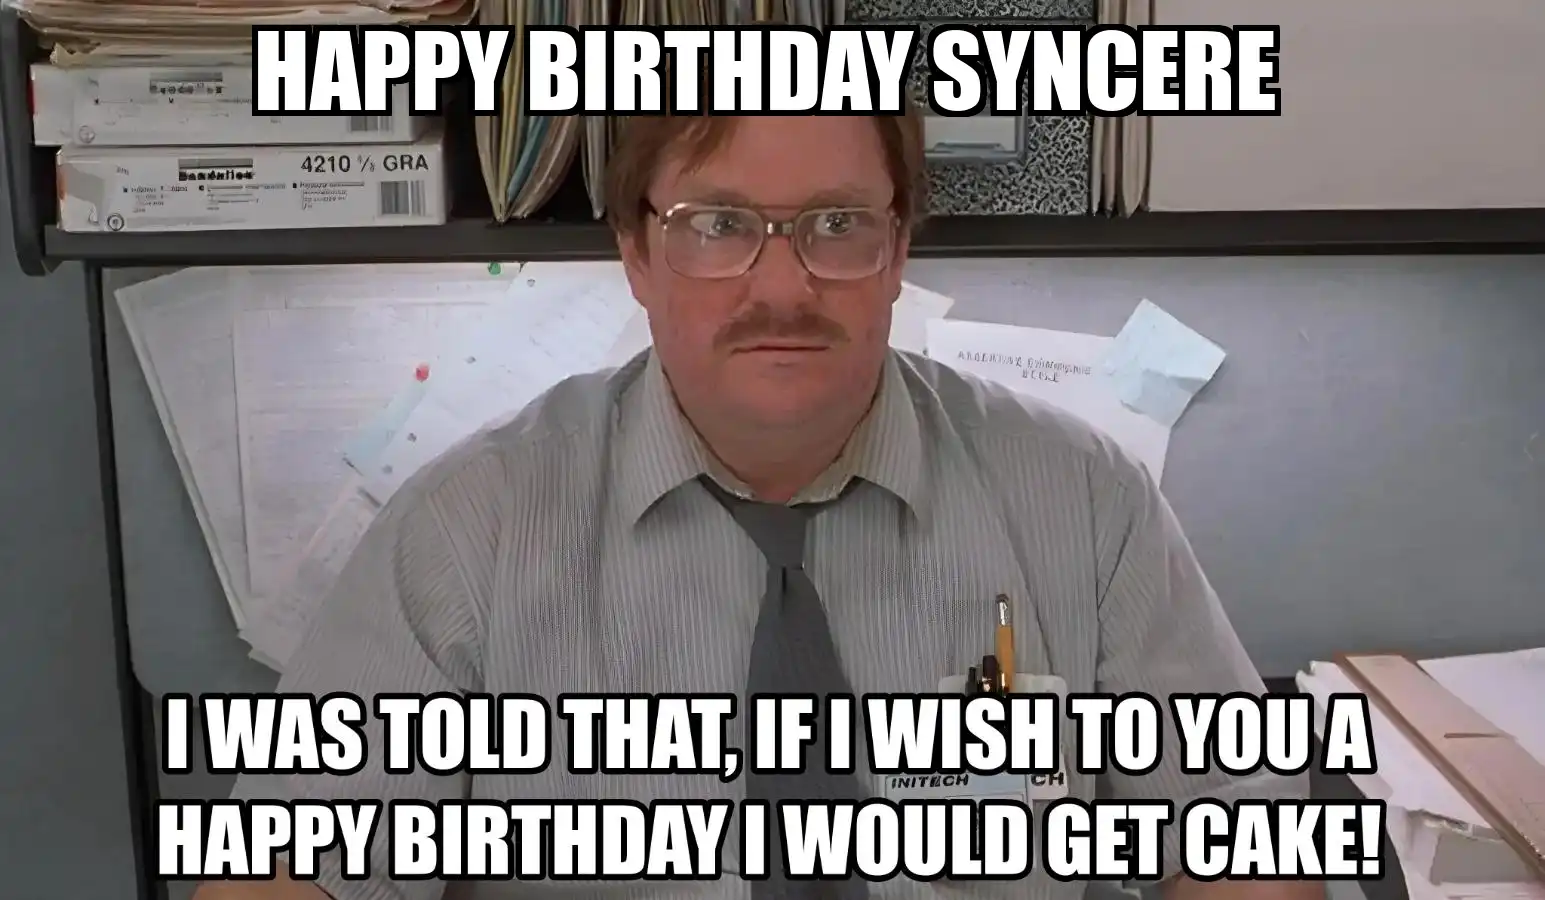 Happy Birthday Syncere I Would Get A Cake Meme